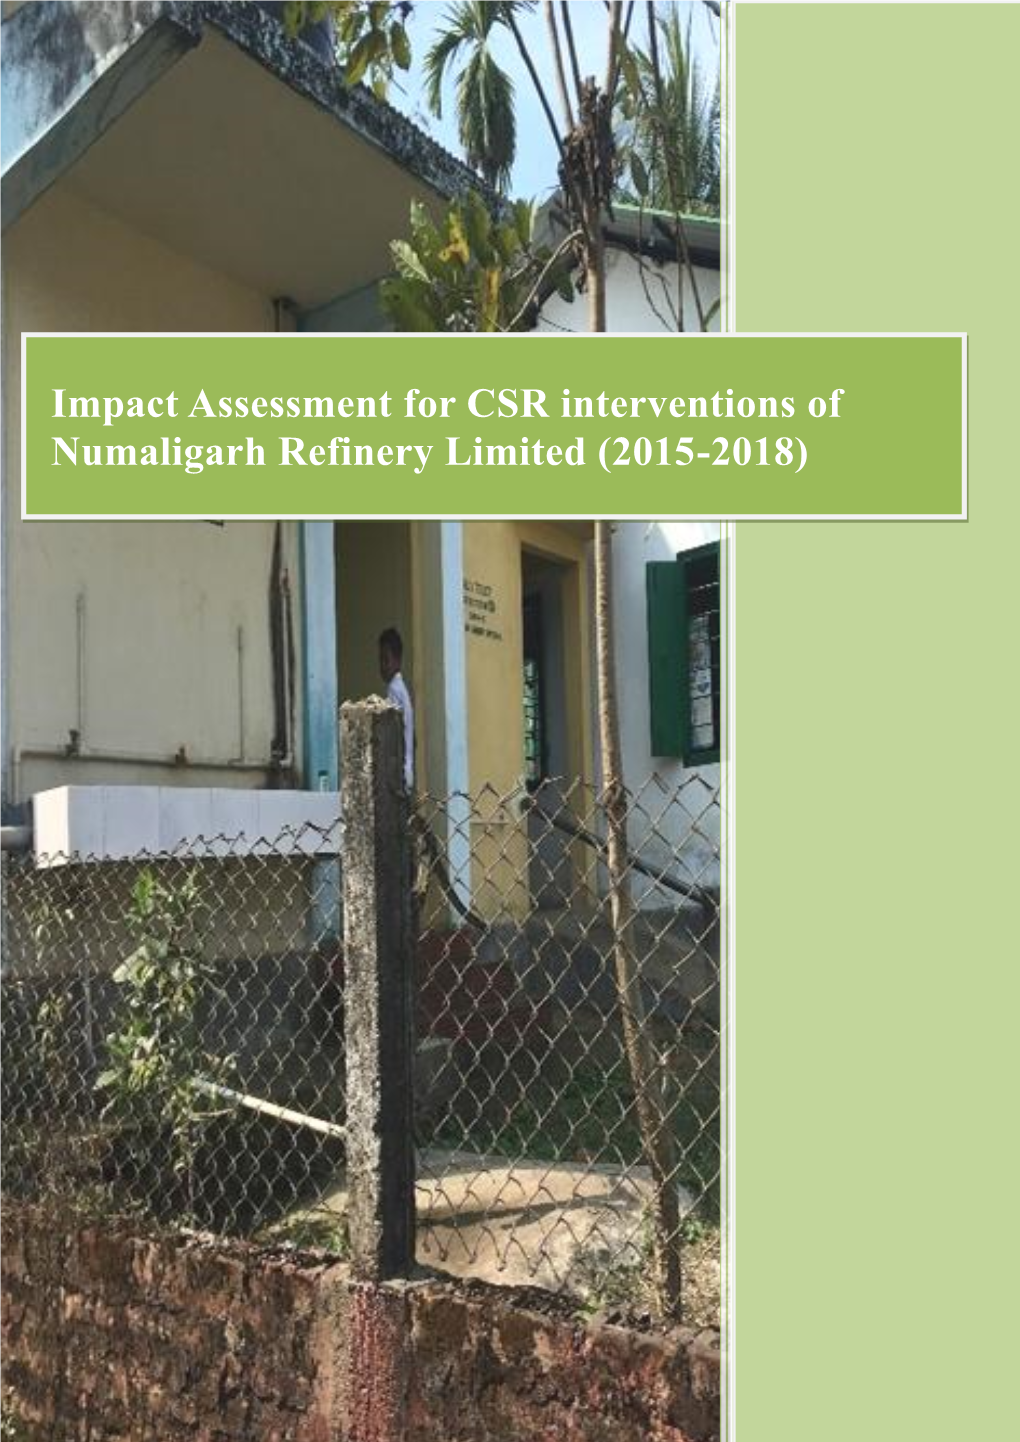 Impact Assessment for CSR Interventions of Numaligarh Refinery Limited (2015-2018)